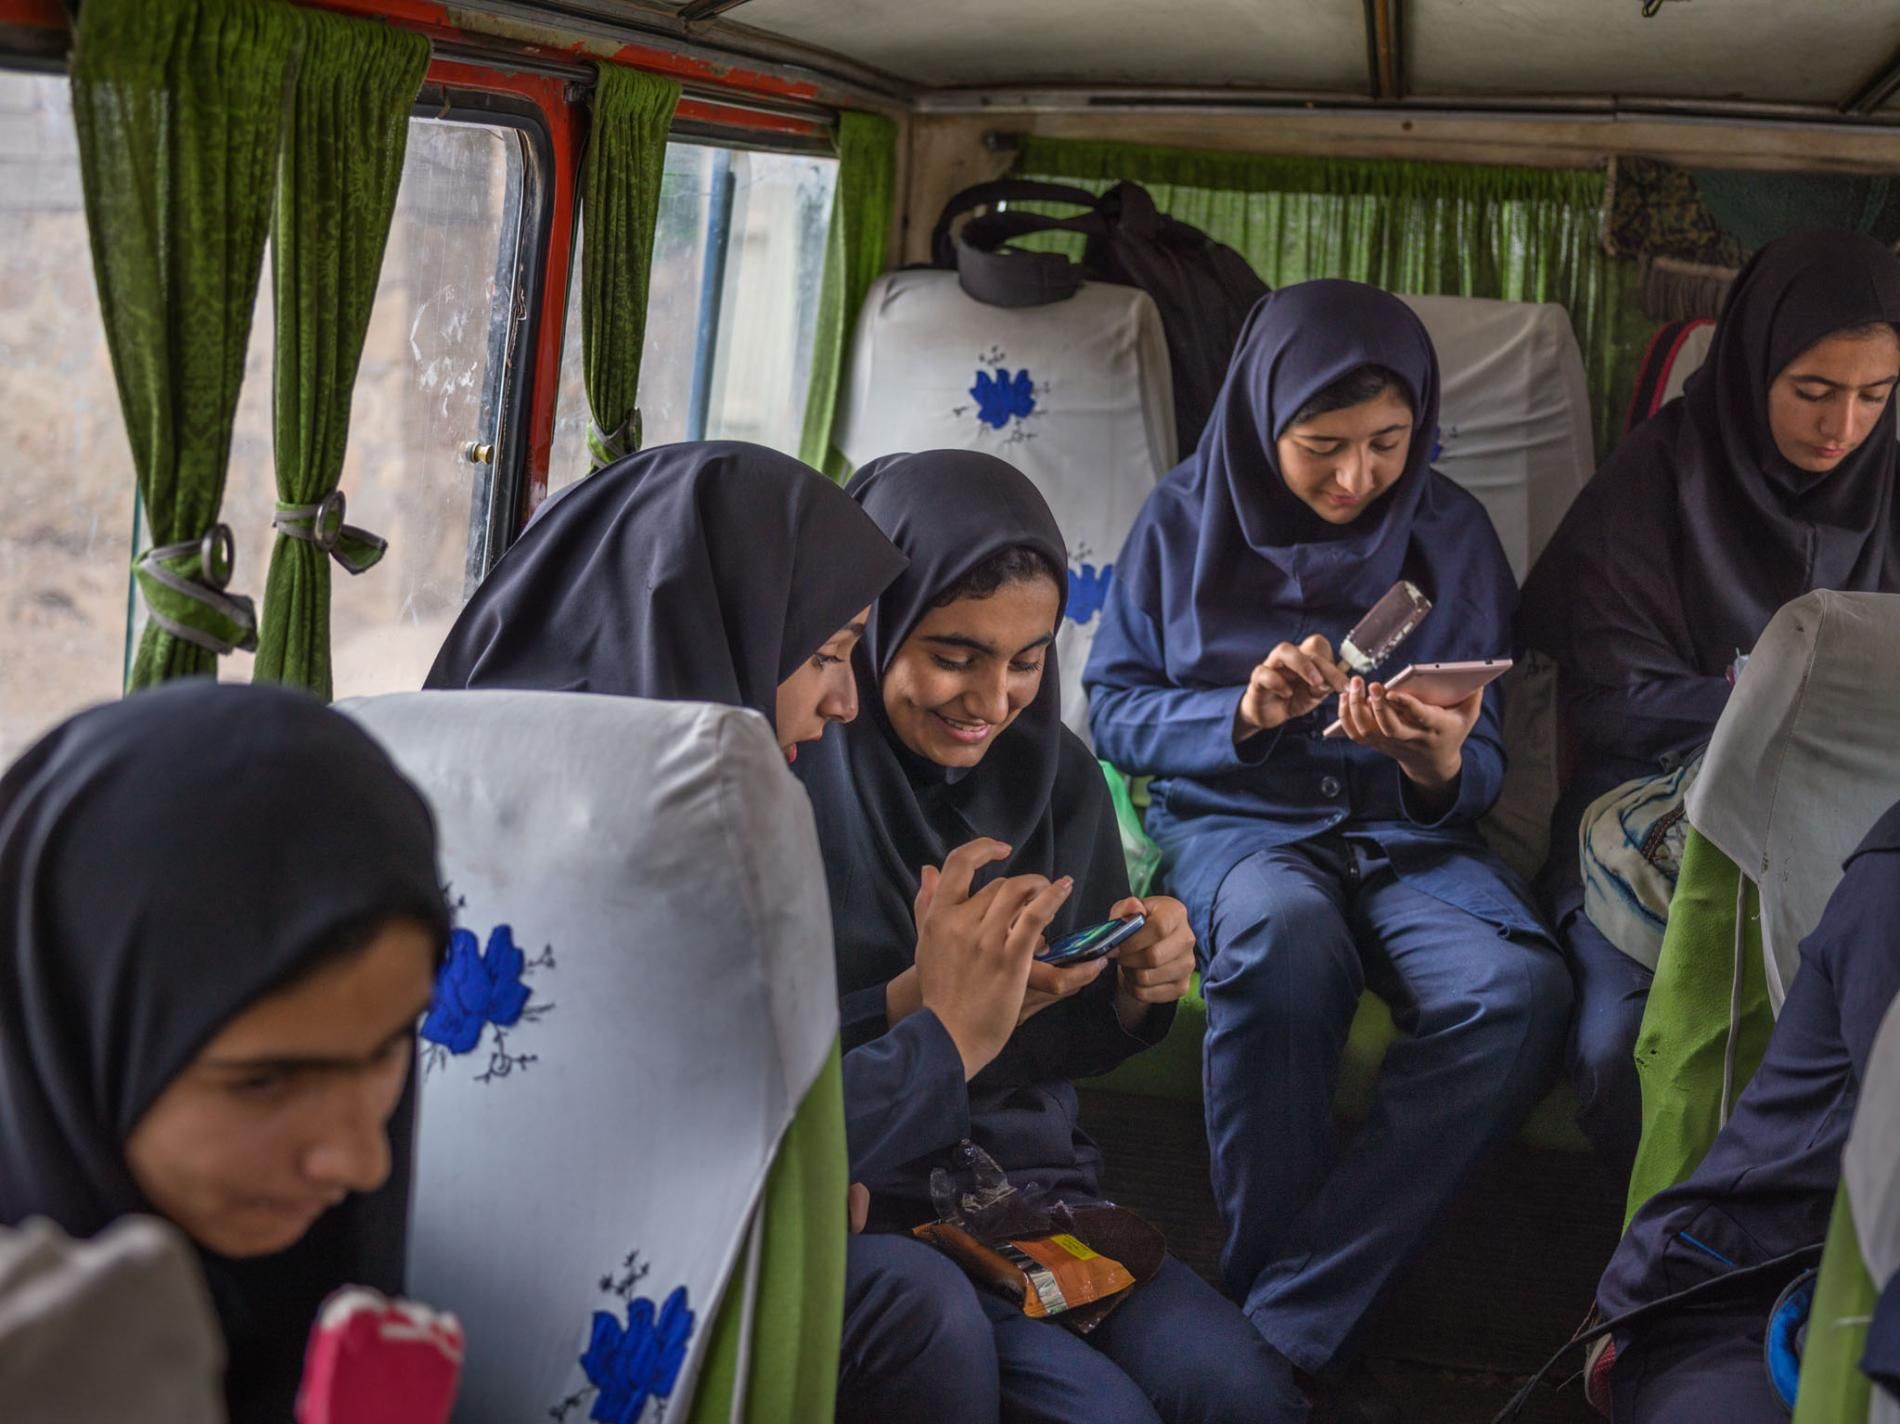 Girls spend nearly two hours en route to Bibi Maryam Boarding School. Most of their families are nomads who move into village houses to enable the students to attend school during the week. Image by Newsha Tavakolian. Iran, 2018.